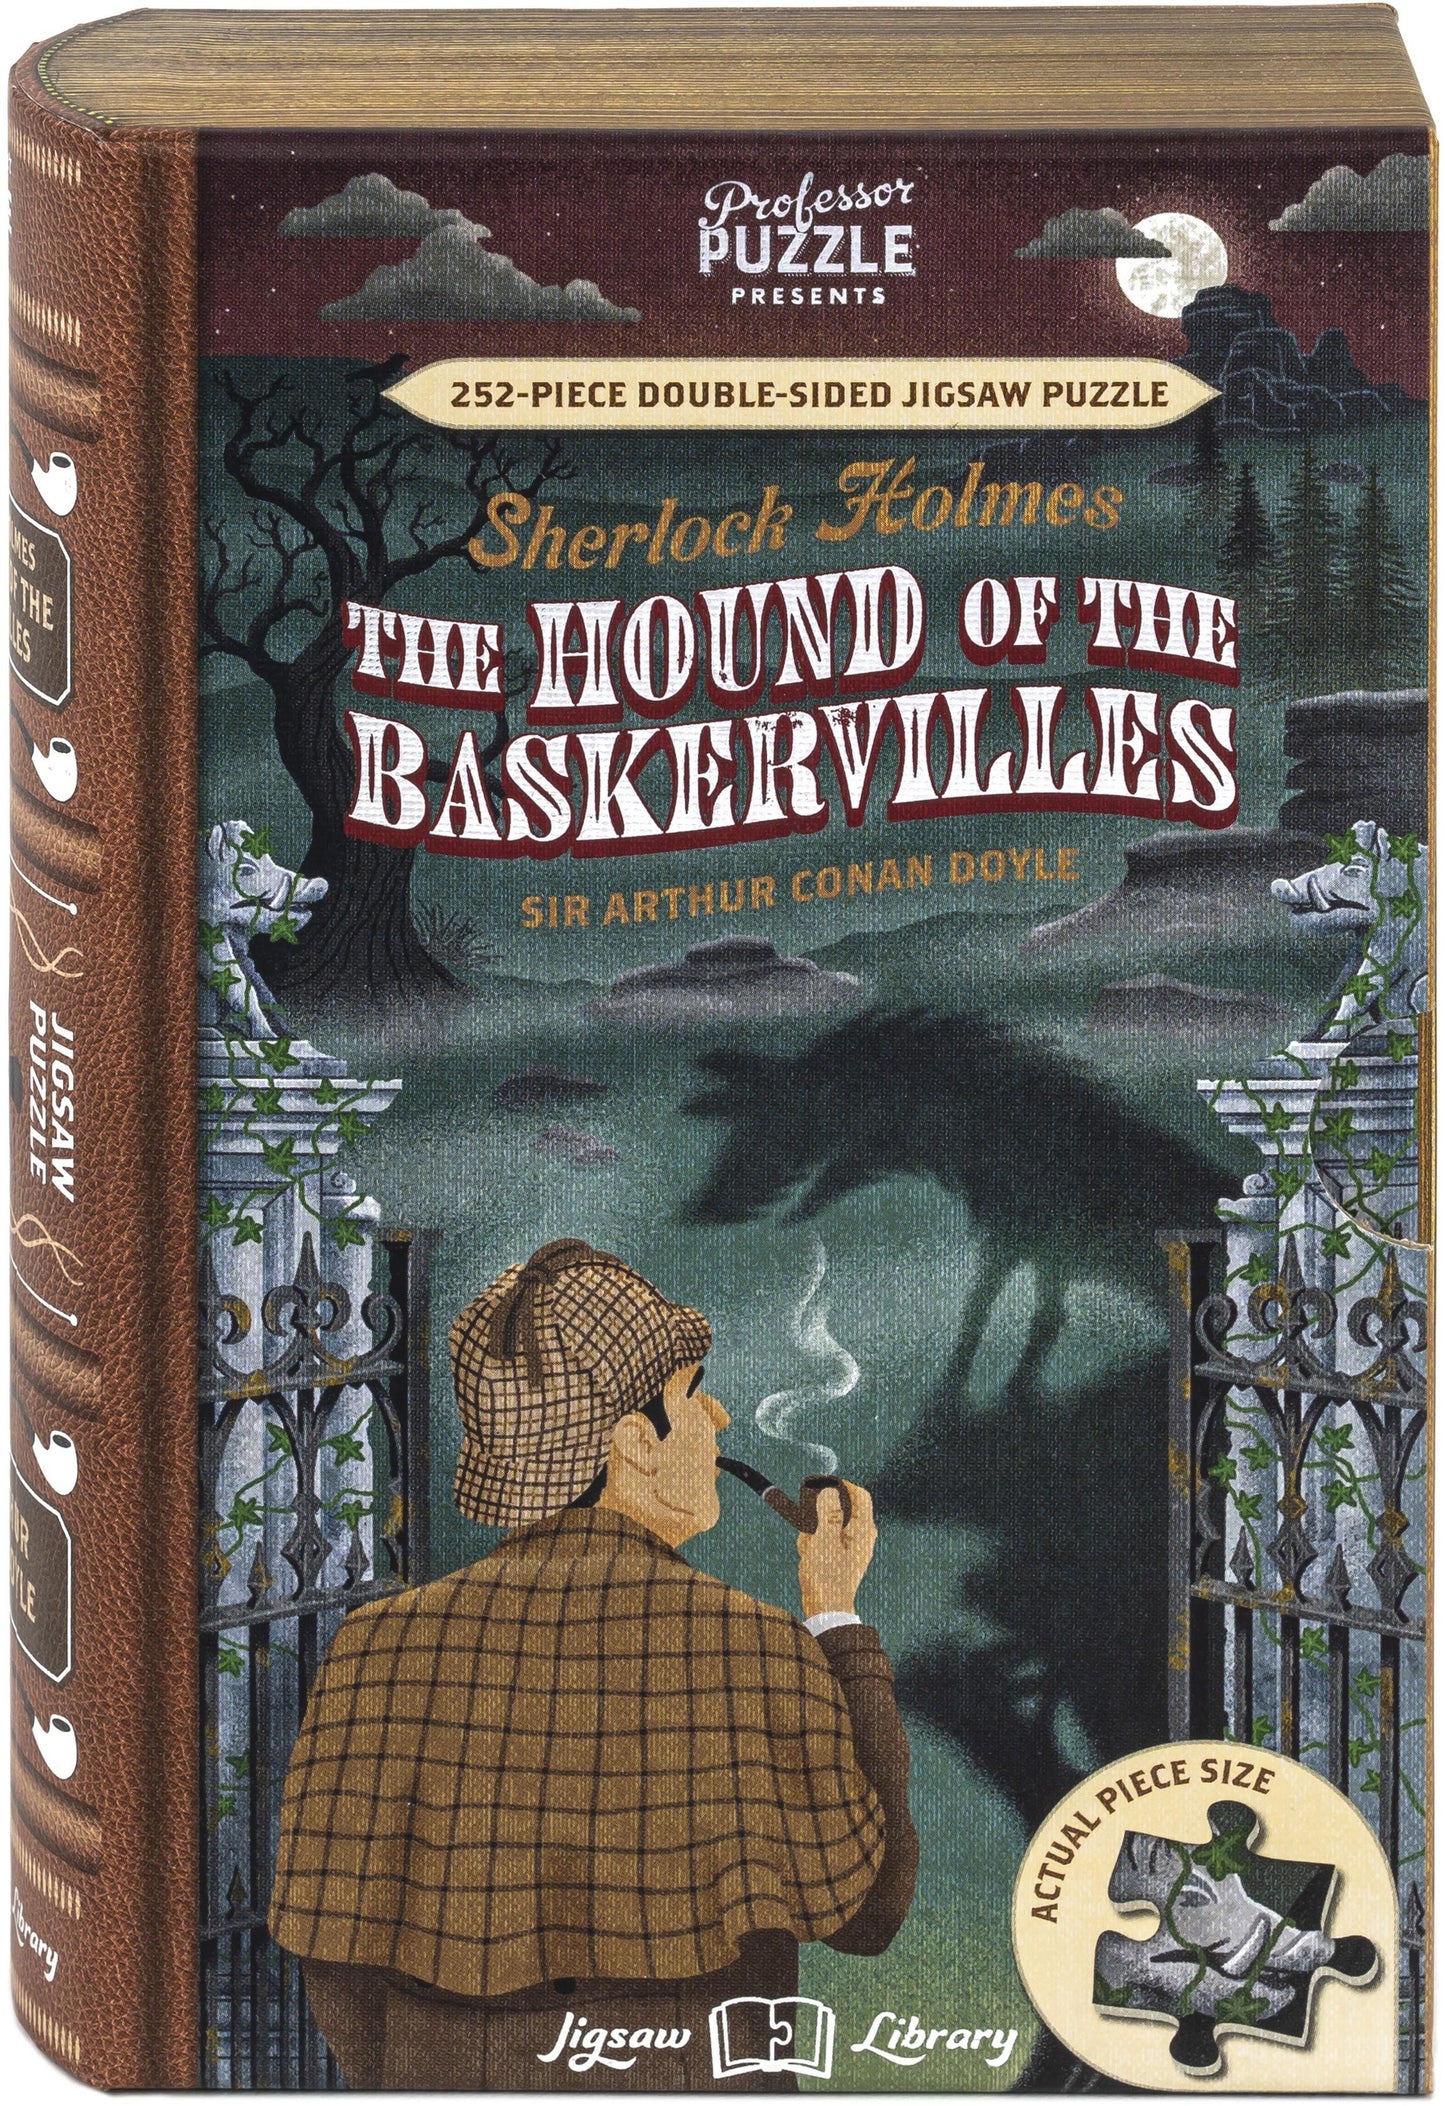 Professor Puzzle - The Hound of the Baskervilles - 252 Piece Jigsaw Puzzle